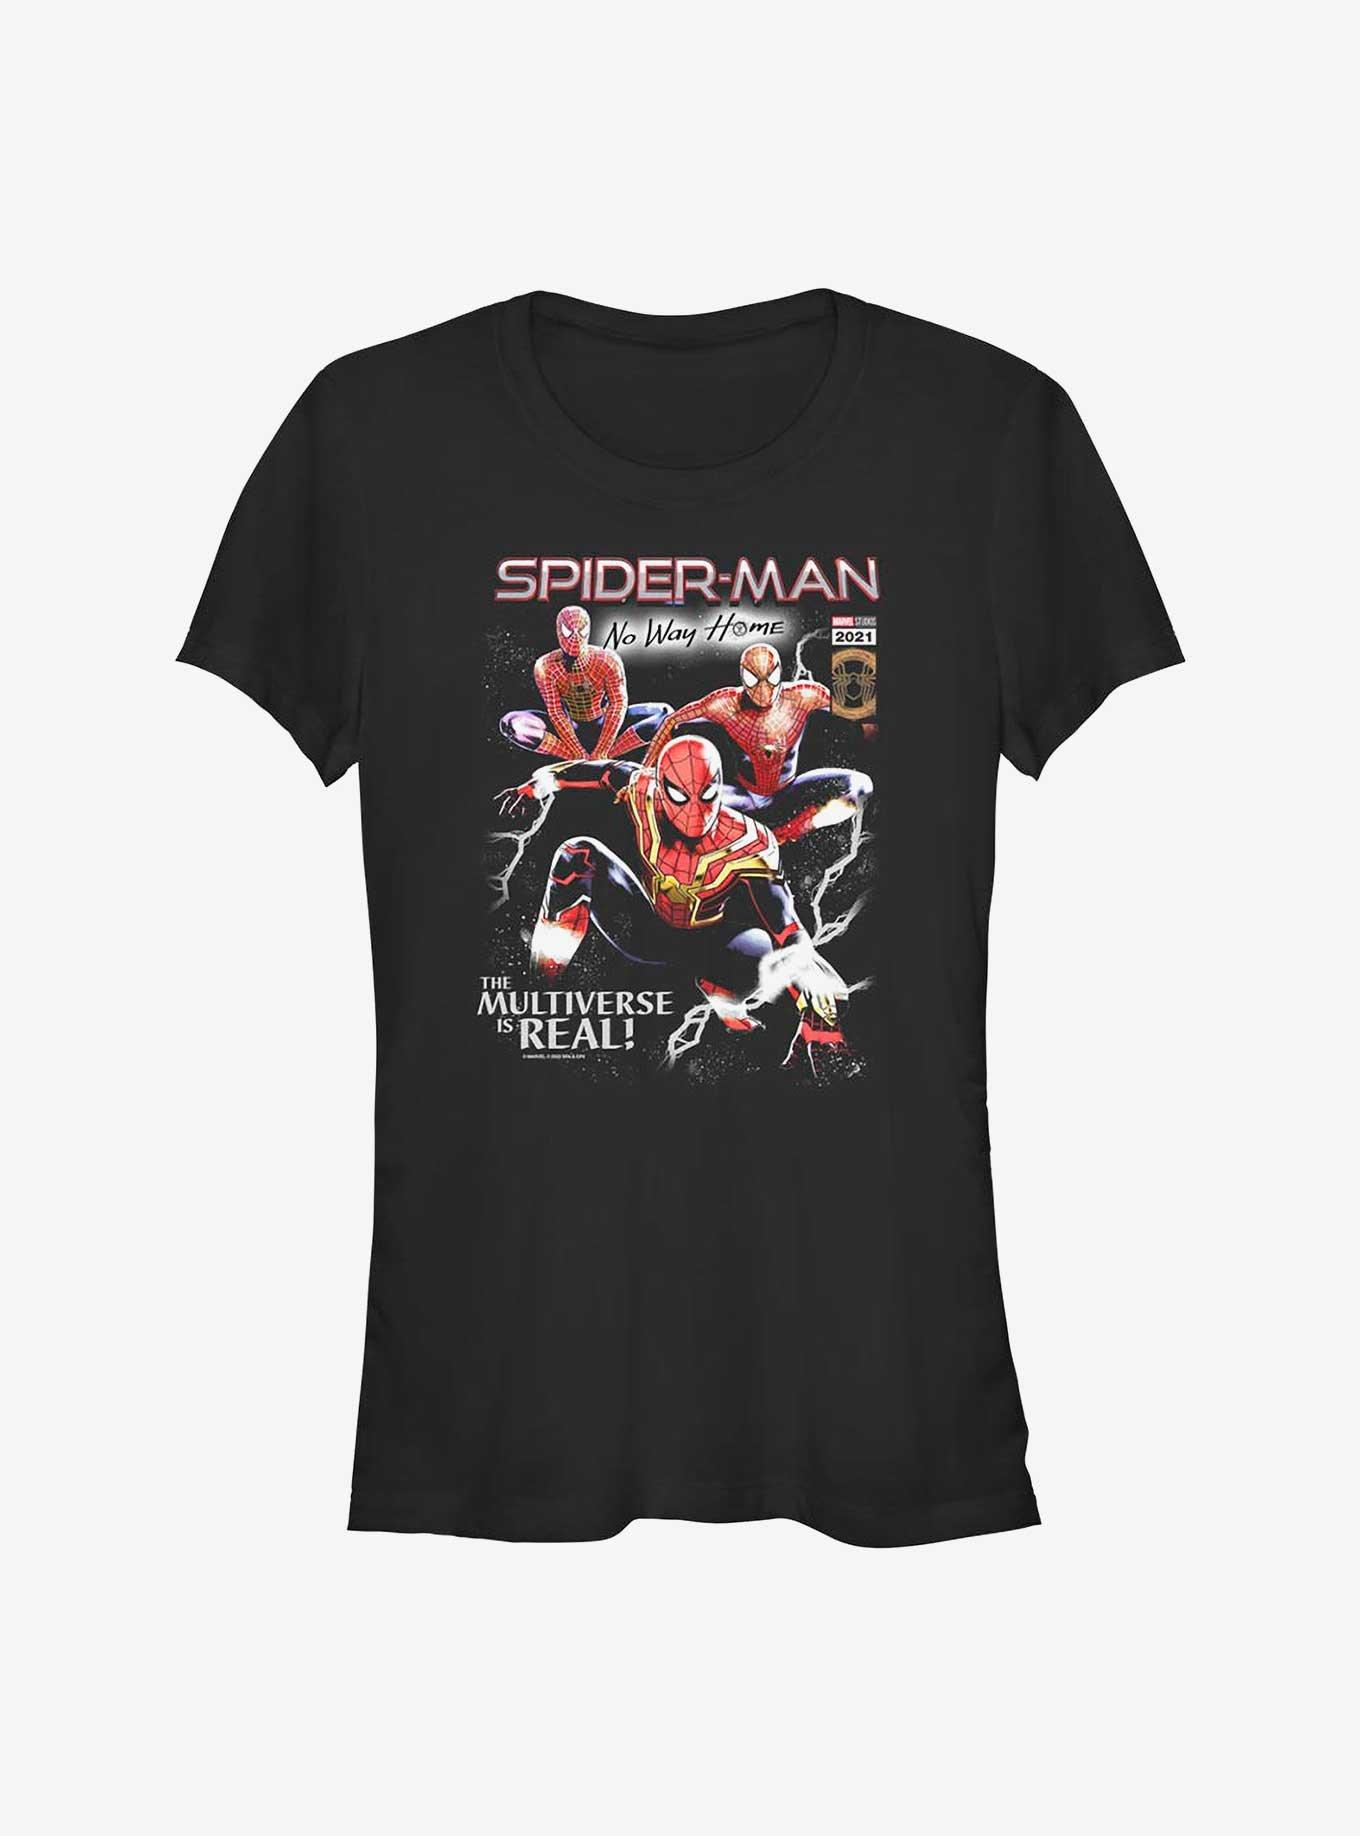 Marvel Spider-Man: No Way Home The Multiverse Is Real Girls T-Shirt, BLACK, hi-res